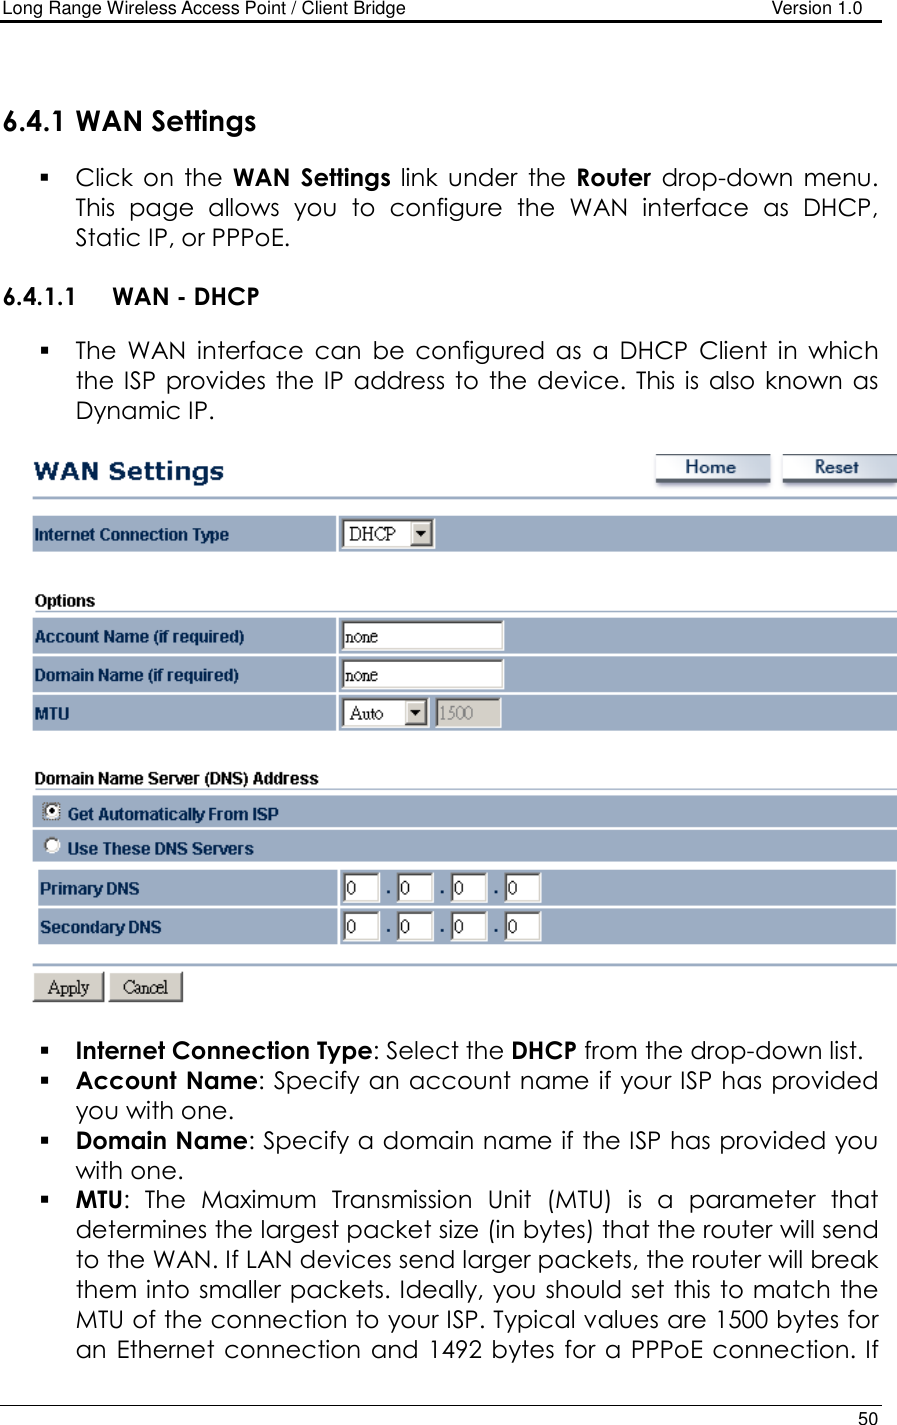 Long Range Wireless Access Point / Client Bridge                                   Version 1.0    50   6.4.1 WAN Settings  Click  on  the  WAN  Settings  link  under  the  Router  drop-down  menu. This  page  allows  you  to  configure  the  WAN  interface  as  DHCP, Static IP, or PPPoE.    6.4.1.1 WAN - DHCP  The  WAN  interface  can  be  configured  as  a  DHCP  Client  in  which the ISP  provides  the IP  address to  the device.  This is  also known  as Dynamic IP.       Internet Connection Type: Select the DHCP from the drop-down list.  Account Name: Specify an account name if your ISP has provided you with one.  Domain Name: Specify a domain name if the ISP has provided you with one.     MTU:  The  Maximum  Transmission  Unit  (MTU)  is  a  parameter  that determines the largest packet size (in bytes) that the router will send to the WAN. If LAN devices send larger packets, the router will break them into smaller packets. Ideally, you should set this to match the MTU of the connection to your ISP. Typical values are 1500 bytes for an Ethernet connection  and 1492 bytes  for  a PPPoE connection. If 